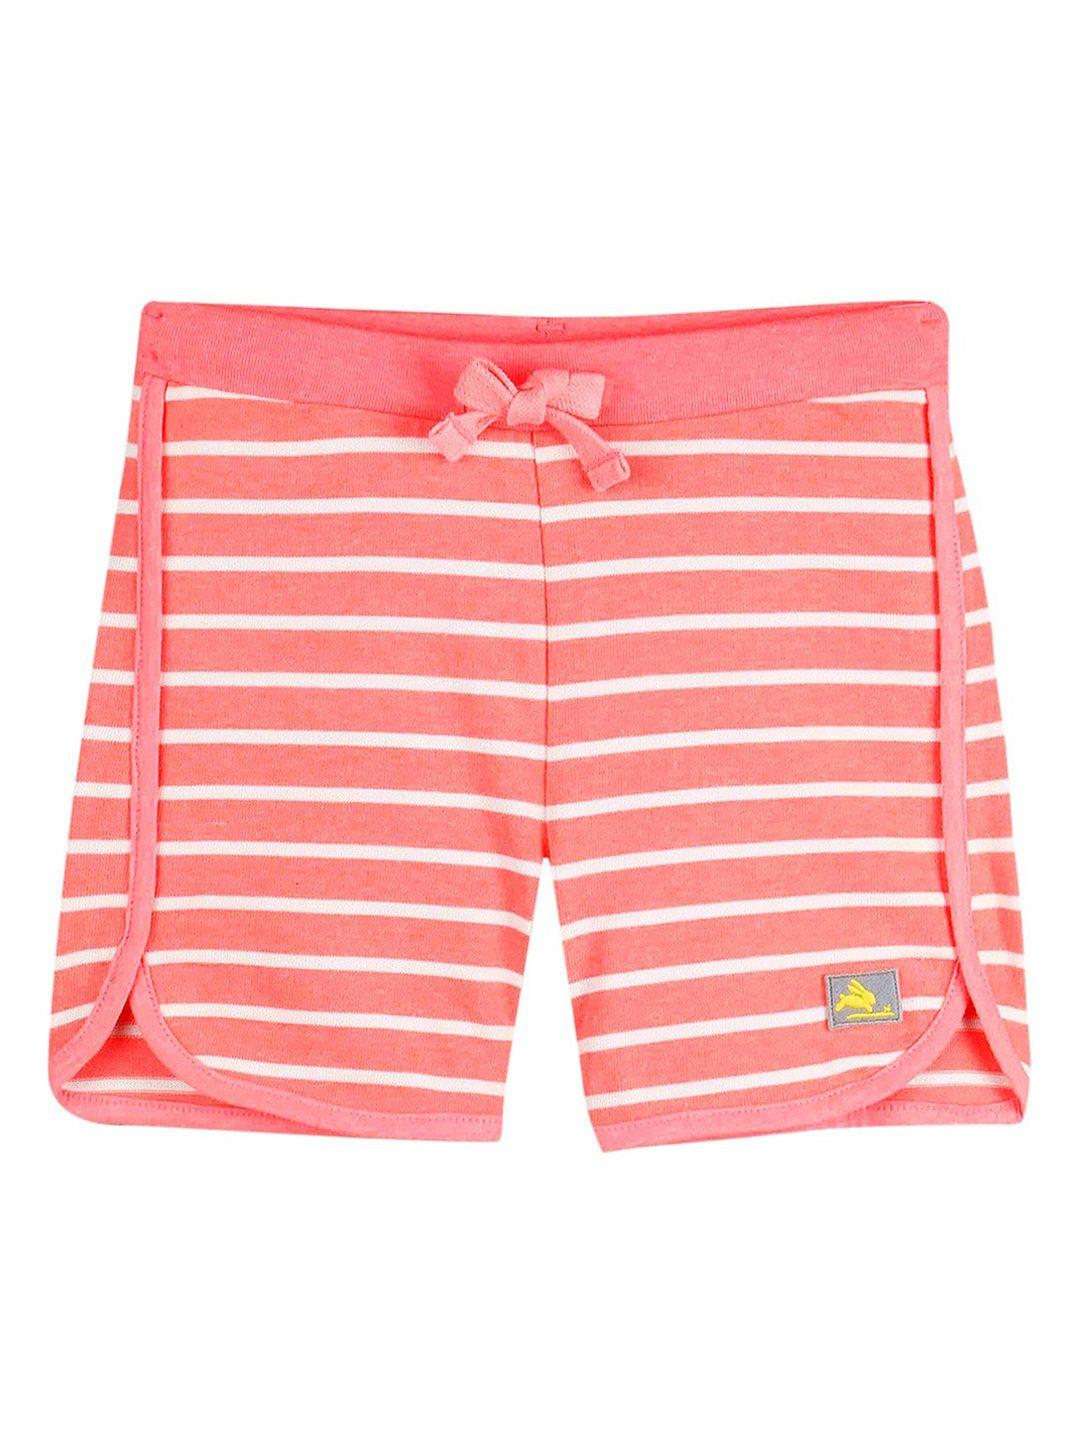 cherry crumble boys and girls pink striped stripes curved shorts